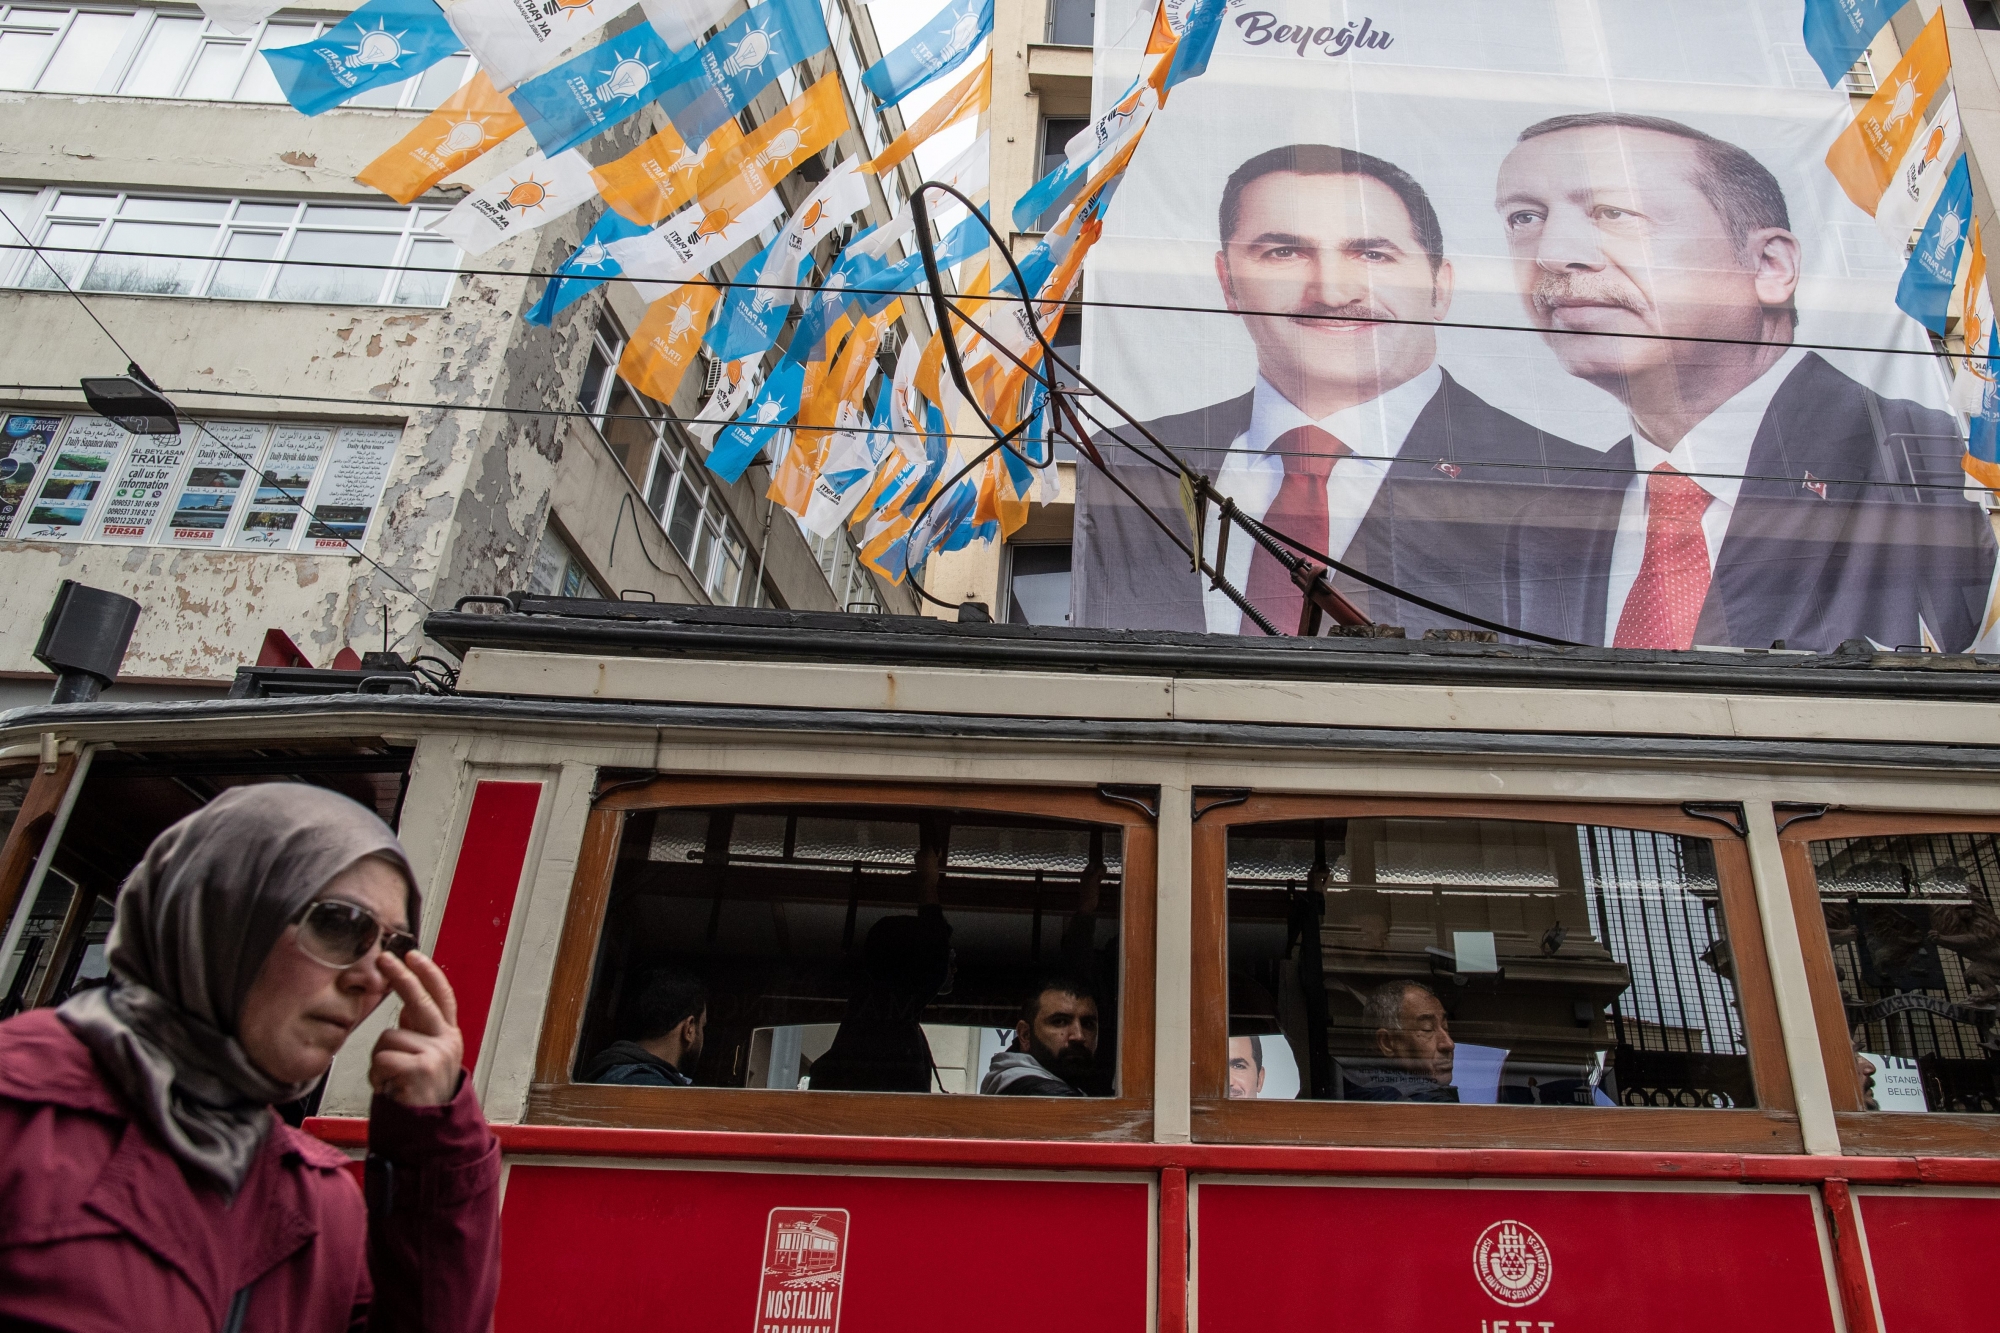 epa07480151 People pass in front of a huge banner with picture of Turkish President Recep Tayyip Erdogan in Istanbul, Turkey, 02 April 2019. According to preliminary results, CHP candidate for Istanbul mayor, Ekrem Imamoglu, beat the AKP candidate Binali Yildirim, by 25,000 votes in what was viewed as a blow to President Recep Tayyip Erdogan's grip on power, as the ruling party, an Islamist conservative outfit, also lost the capital, Ankara.  EPA/SEDAT SUNA TURKEY LOCAL ELECTIONS